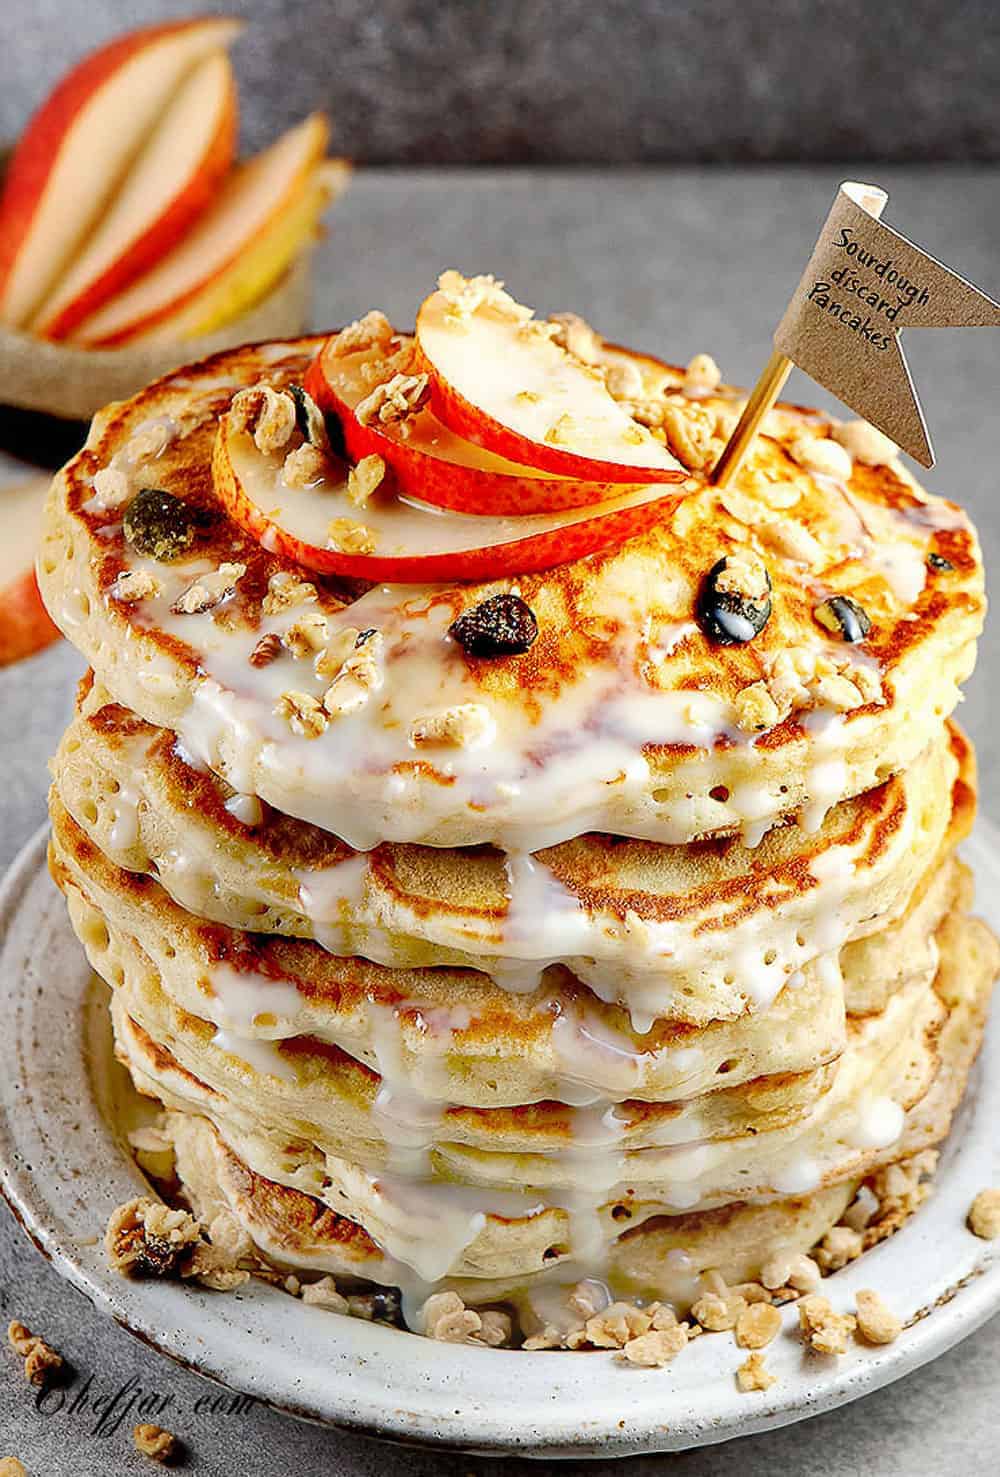 A stack of pancakes with icing and apples.